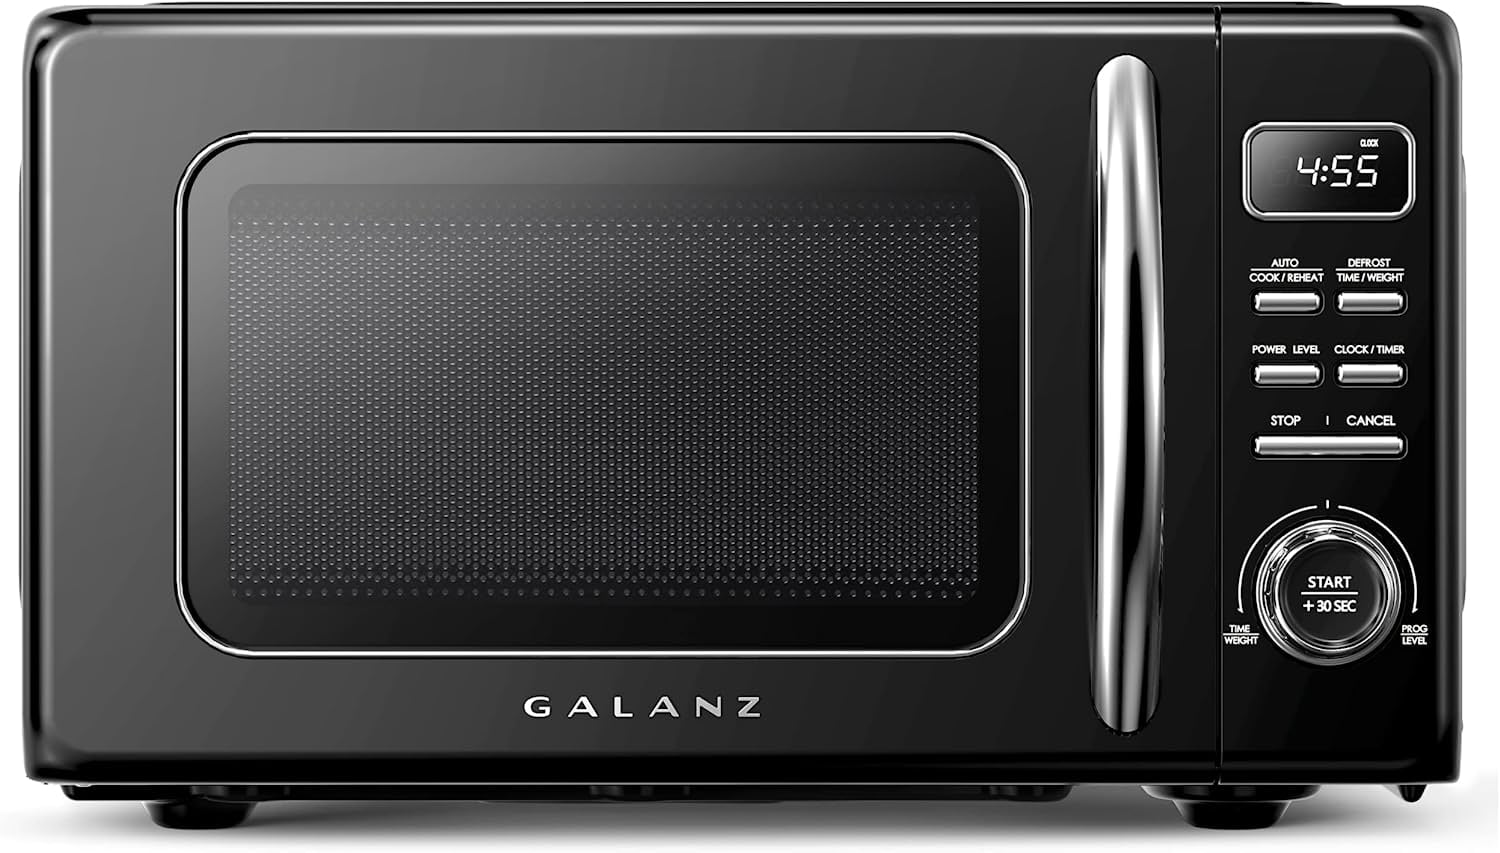 Galanz Microwave Oven Household Convenient Smart Flat Light Wave Oven  Integrated 25 Liters Large Capacity - Microwave Ovens - AliExpress